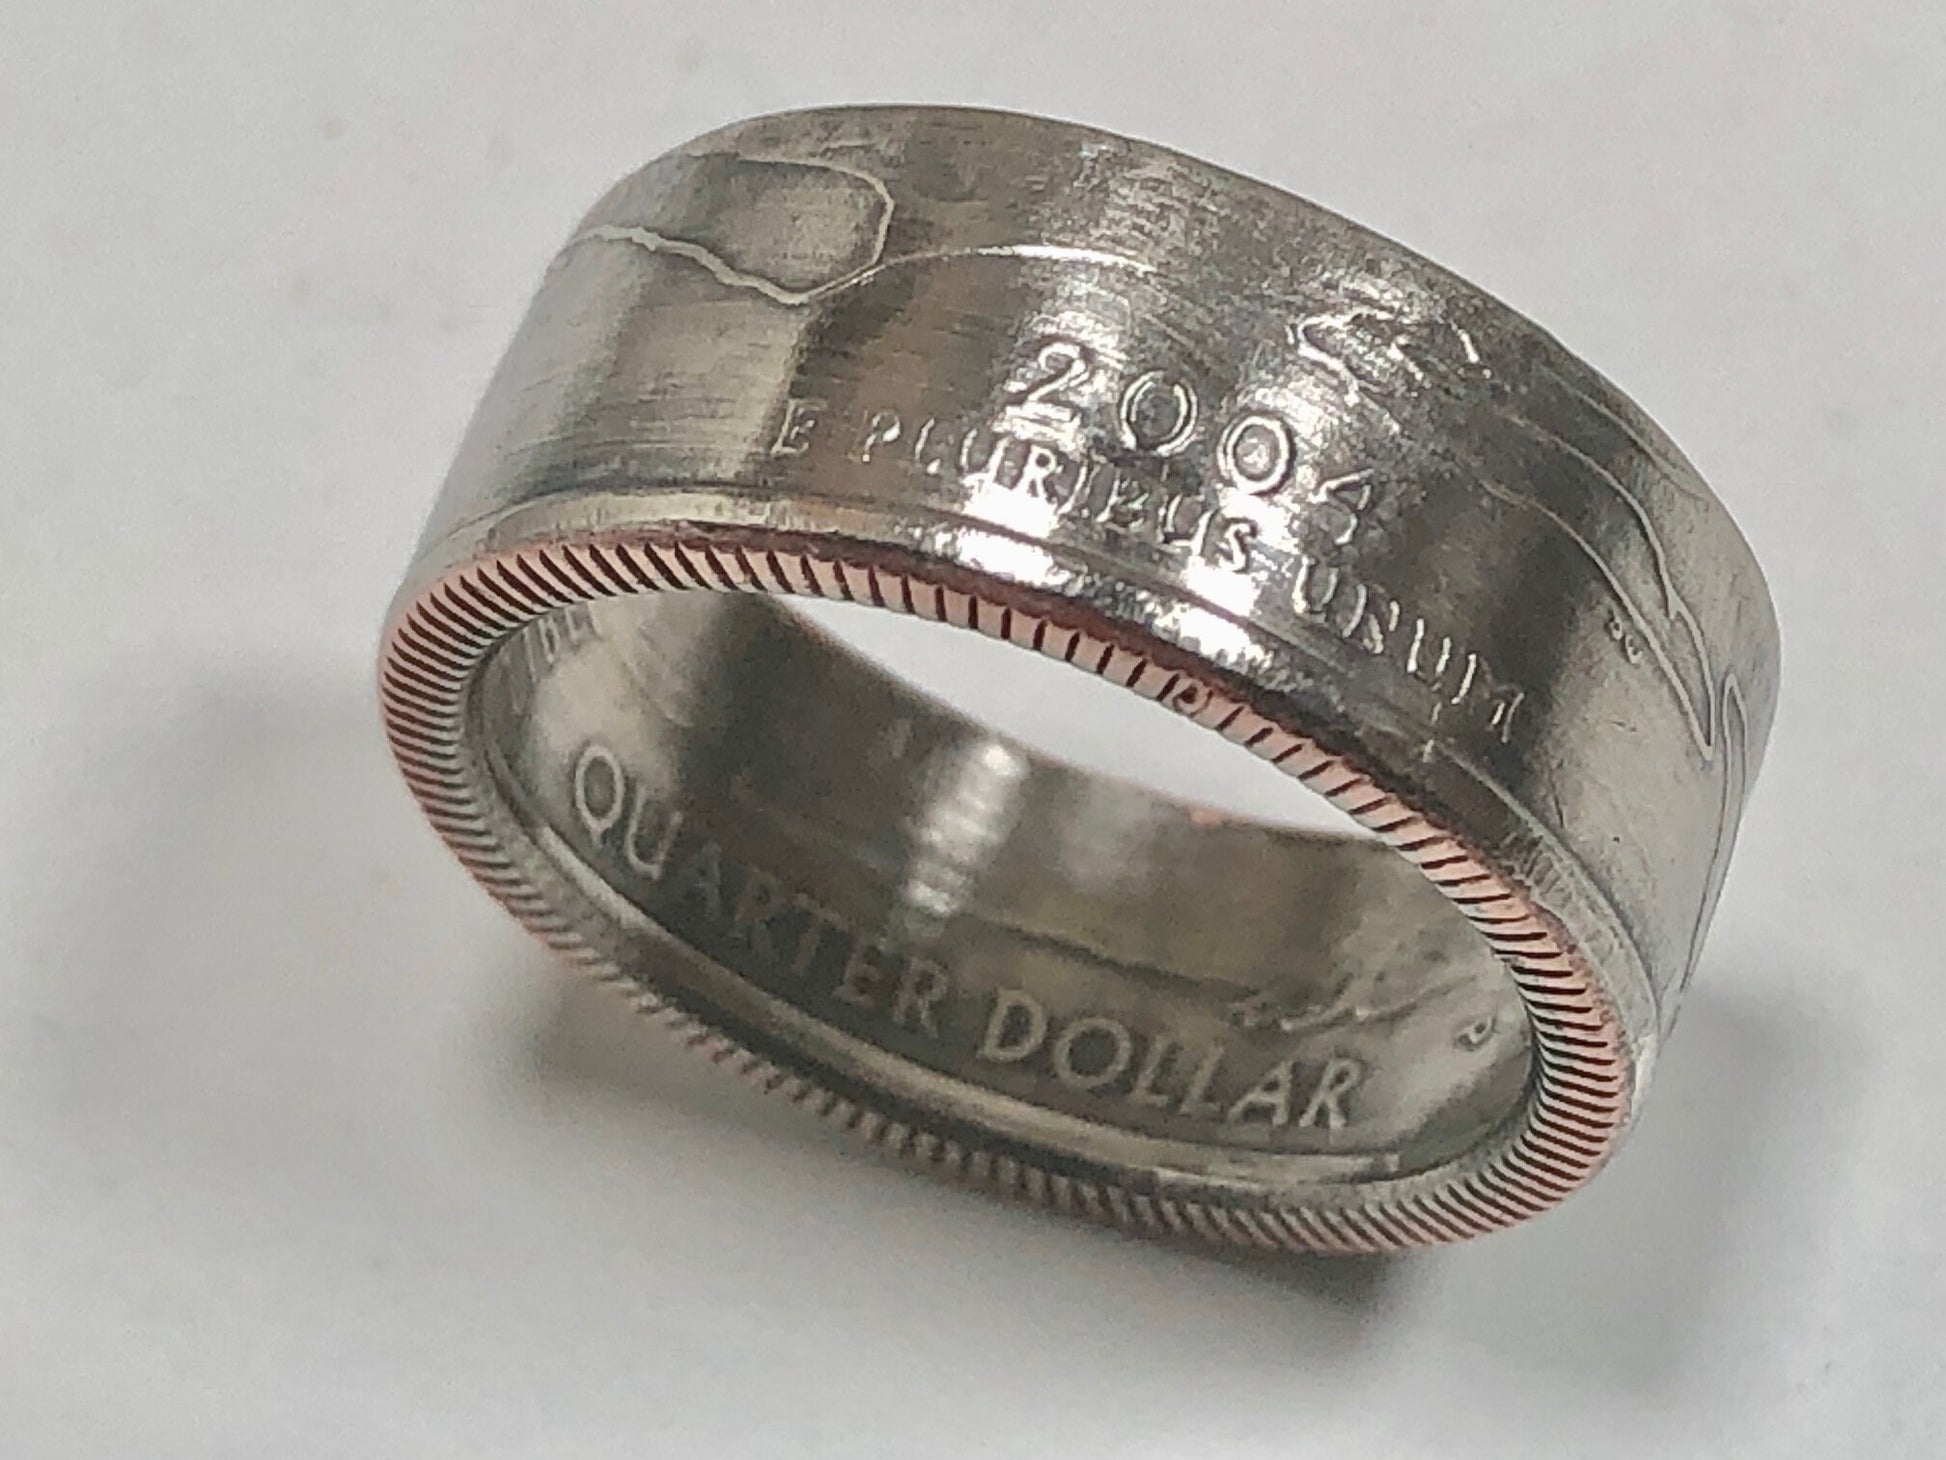 Michigan Ring State Quarter Coin Ring Hand Made